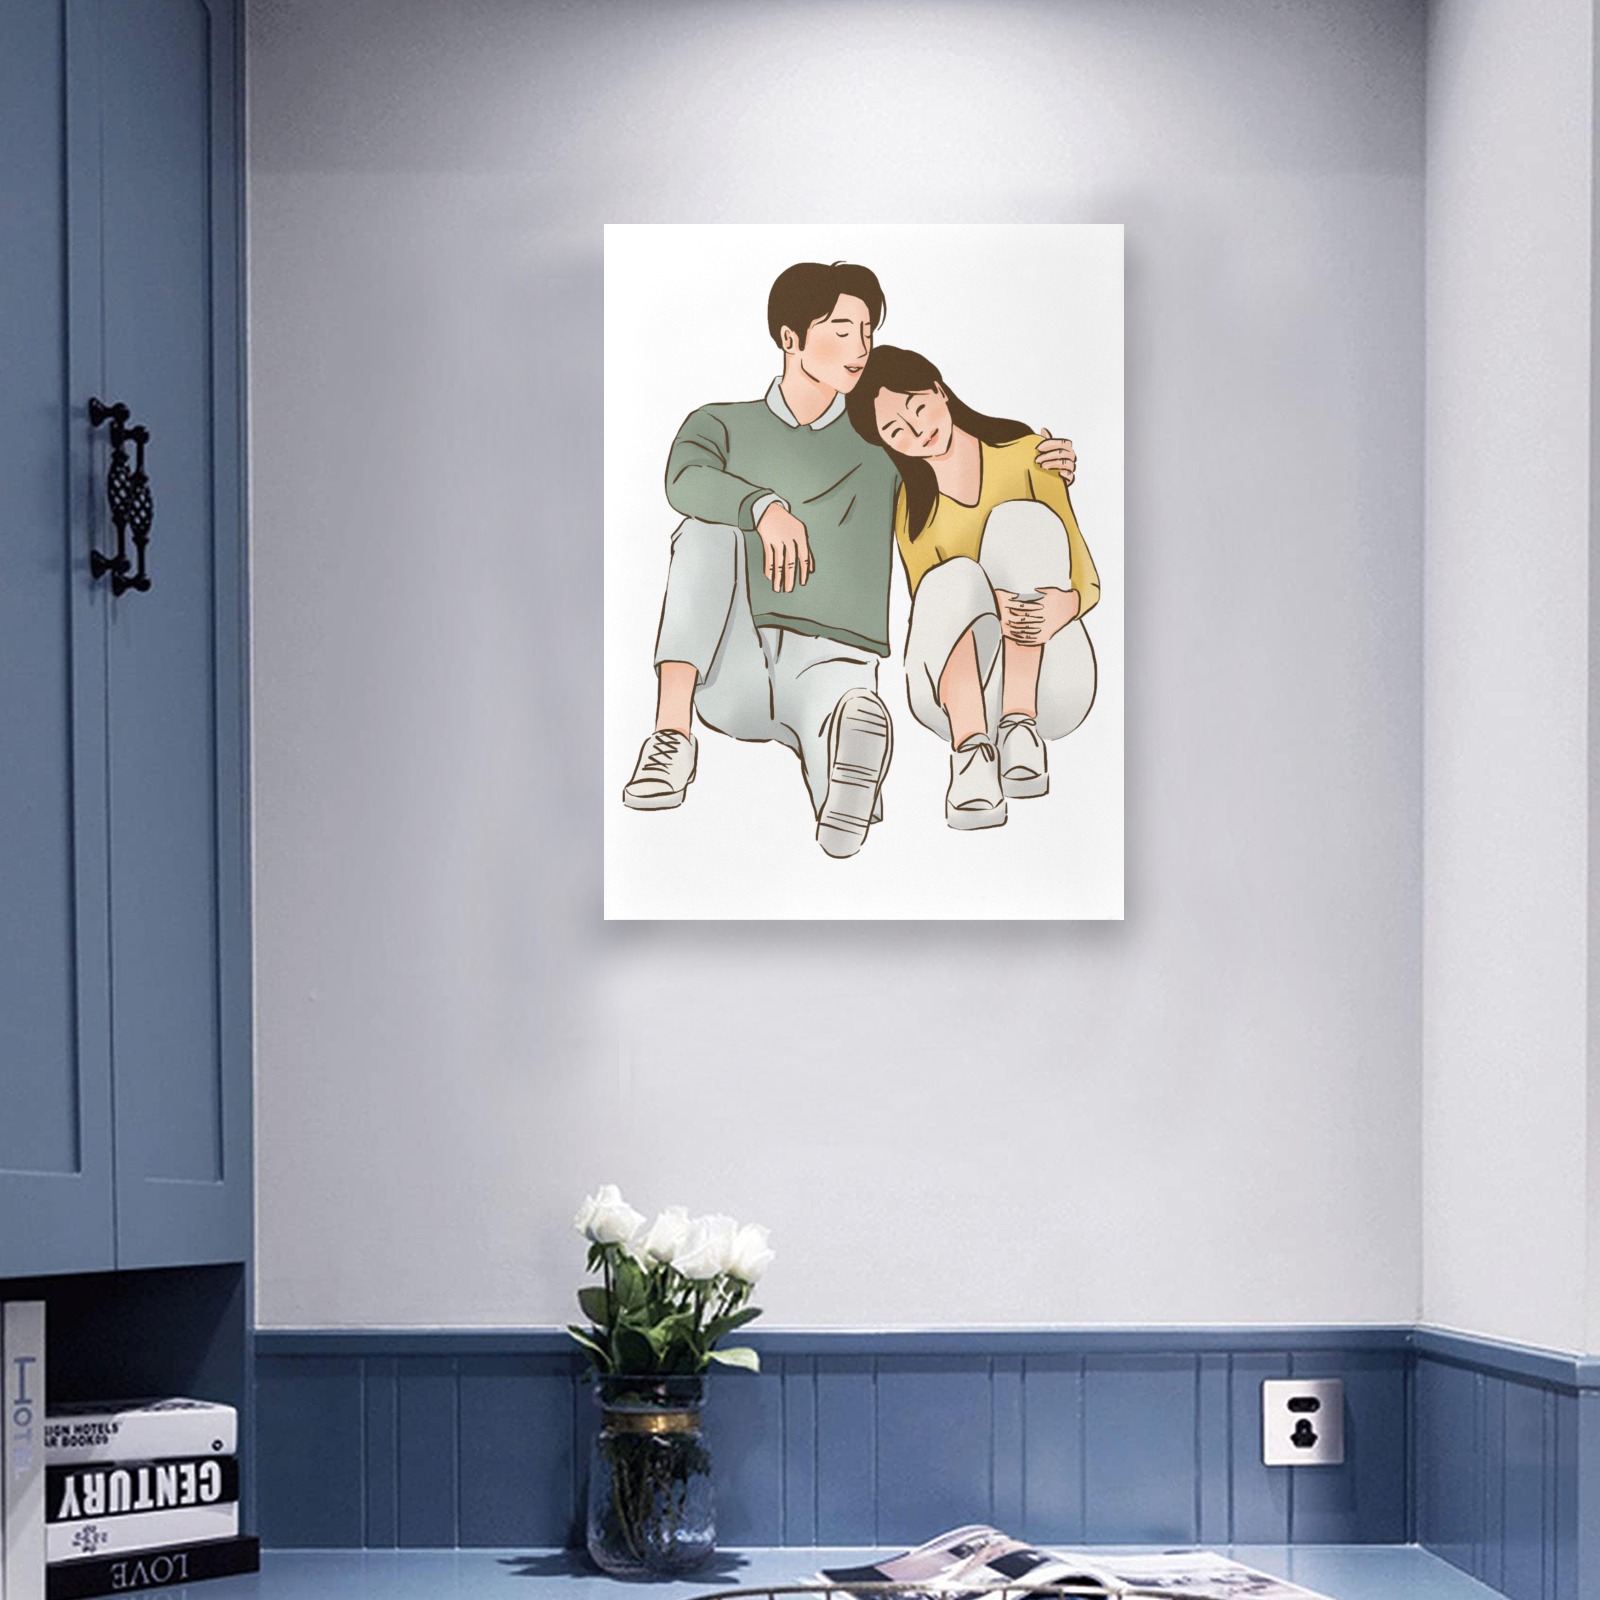 Finding peace in you Couple design Frame Canvas Print 24"x32"